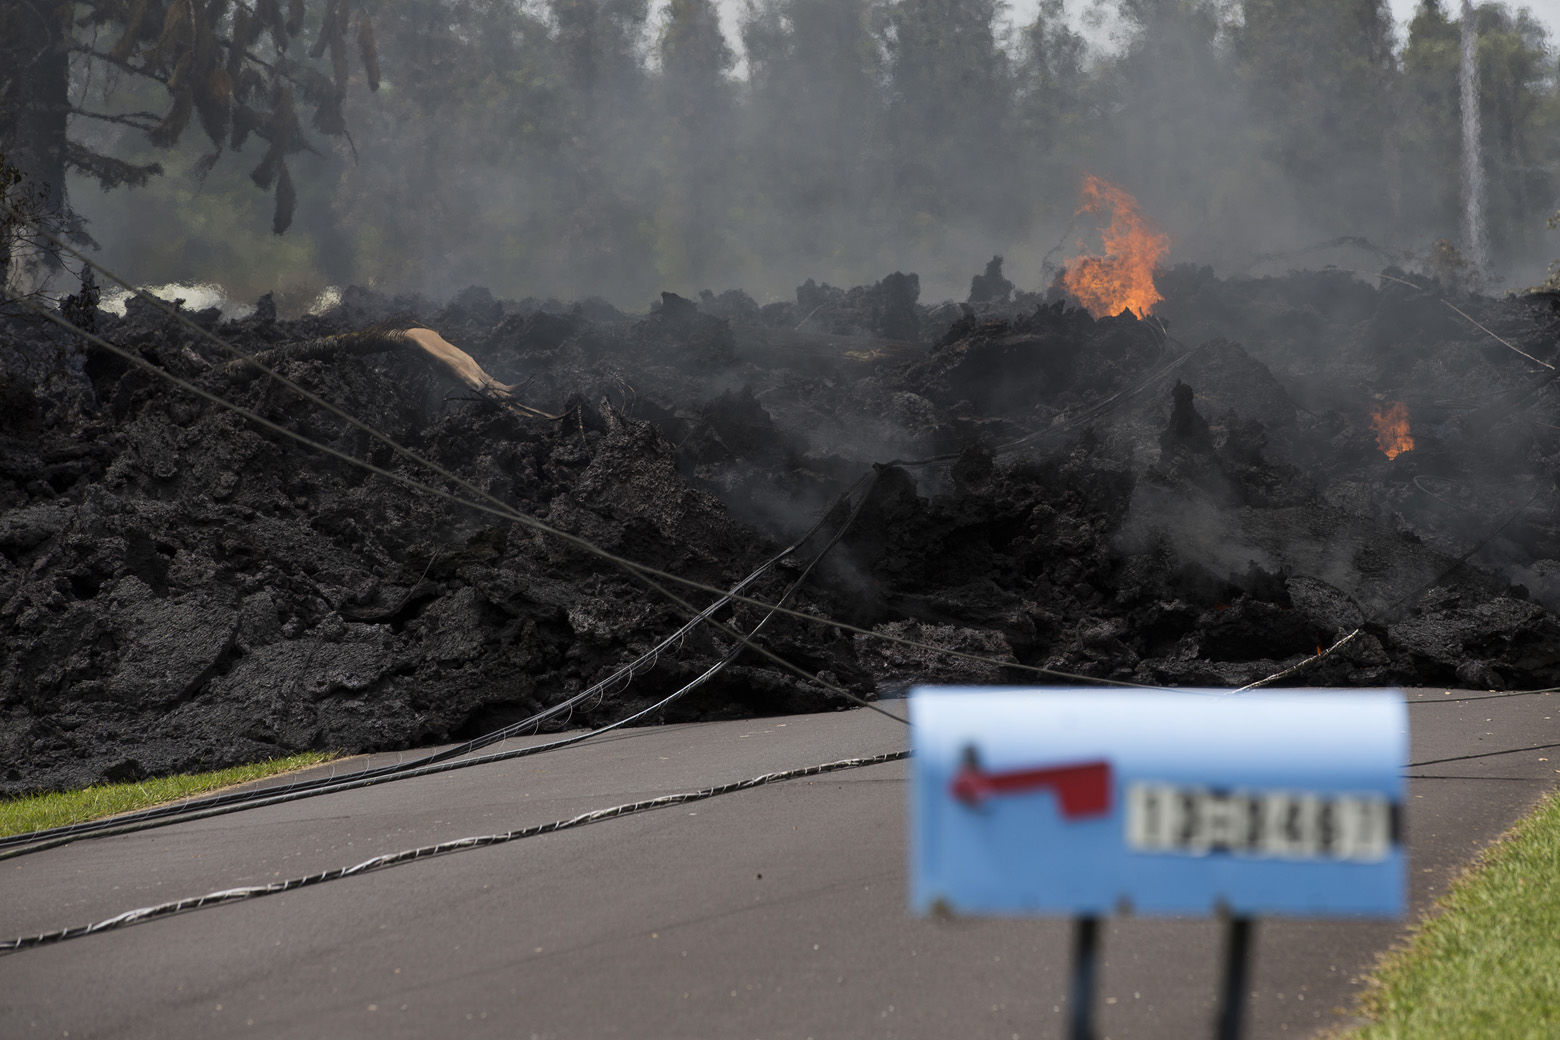 A mail box stands near the lava flow in the Leilani Estates, Saturday, May 5, 2018, in Pahoa, Hawaii. The Hawaiian Volcanoes Observatory said eight volcanic vents opened in the Big Island residential neighborhood of Leilani Estates since Thursday. The Leilani Estates area is at the greatest risk for more lava outbreaks. (AP Photo/Marco Garcia)